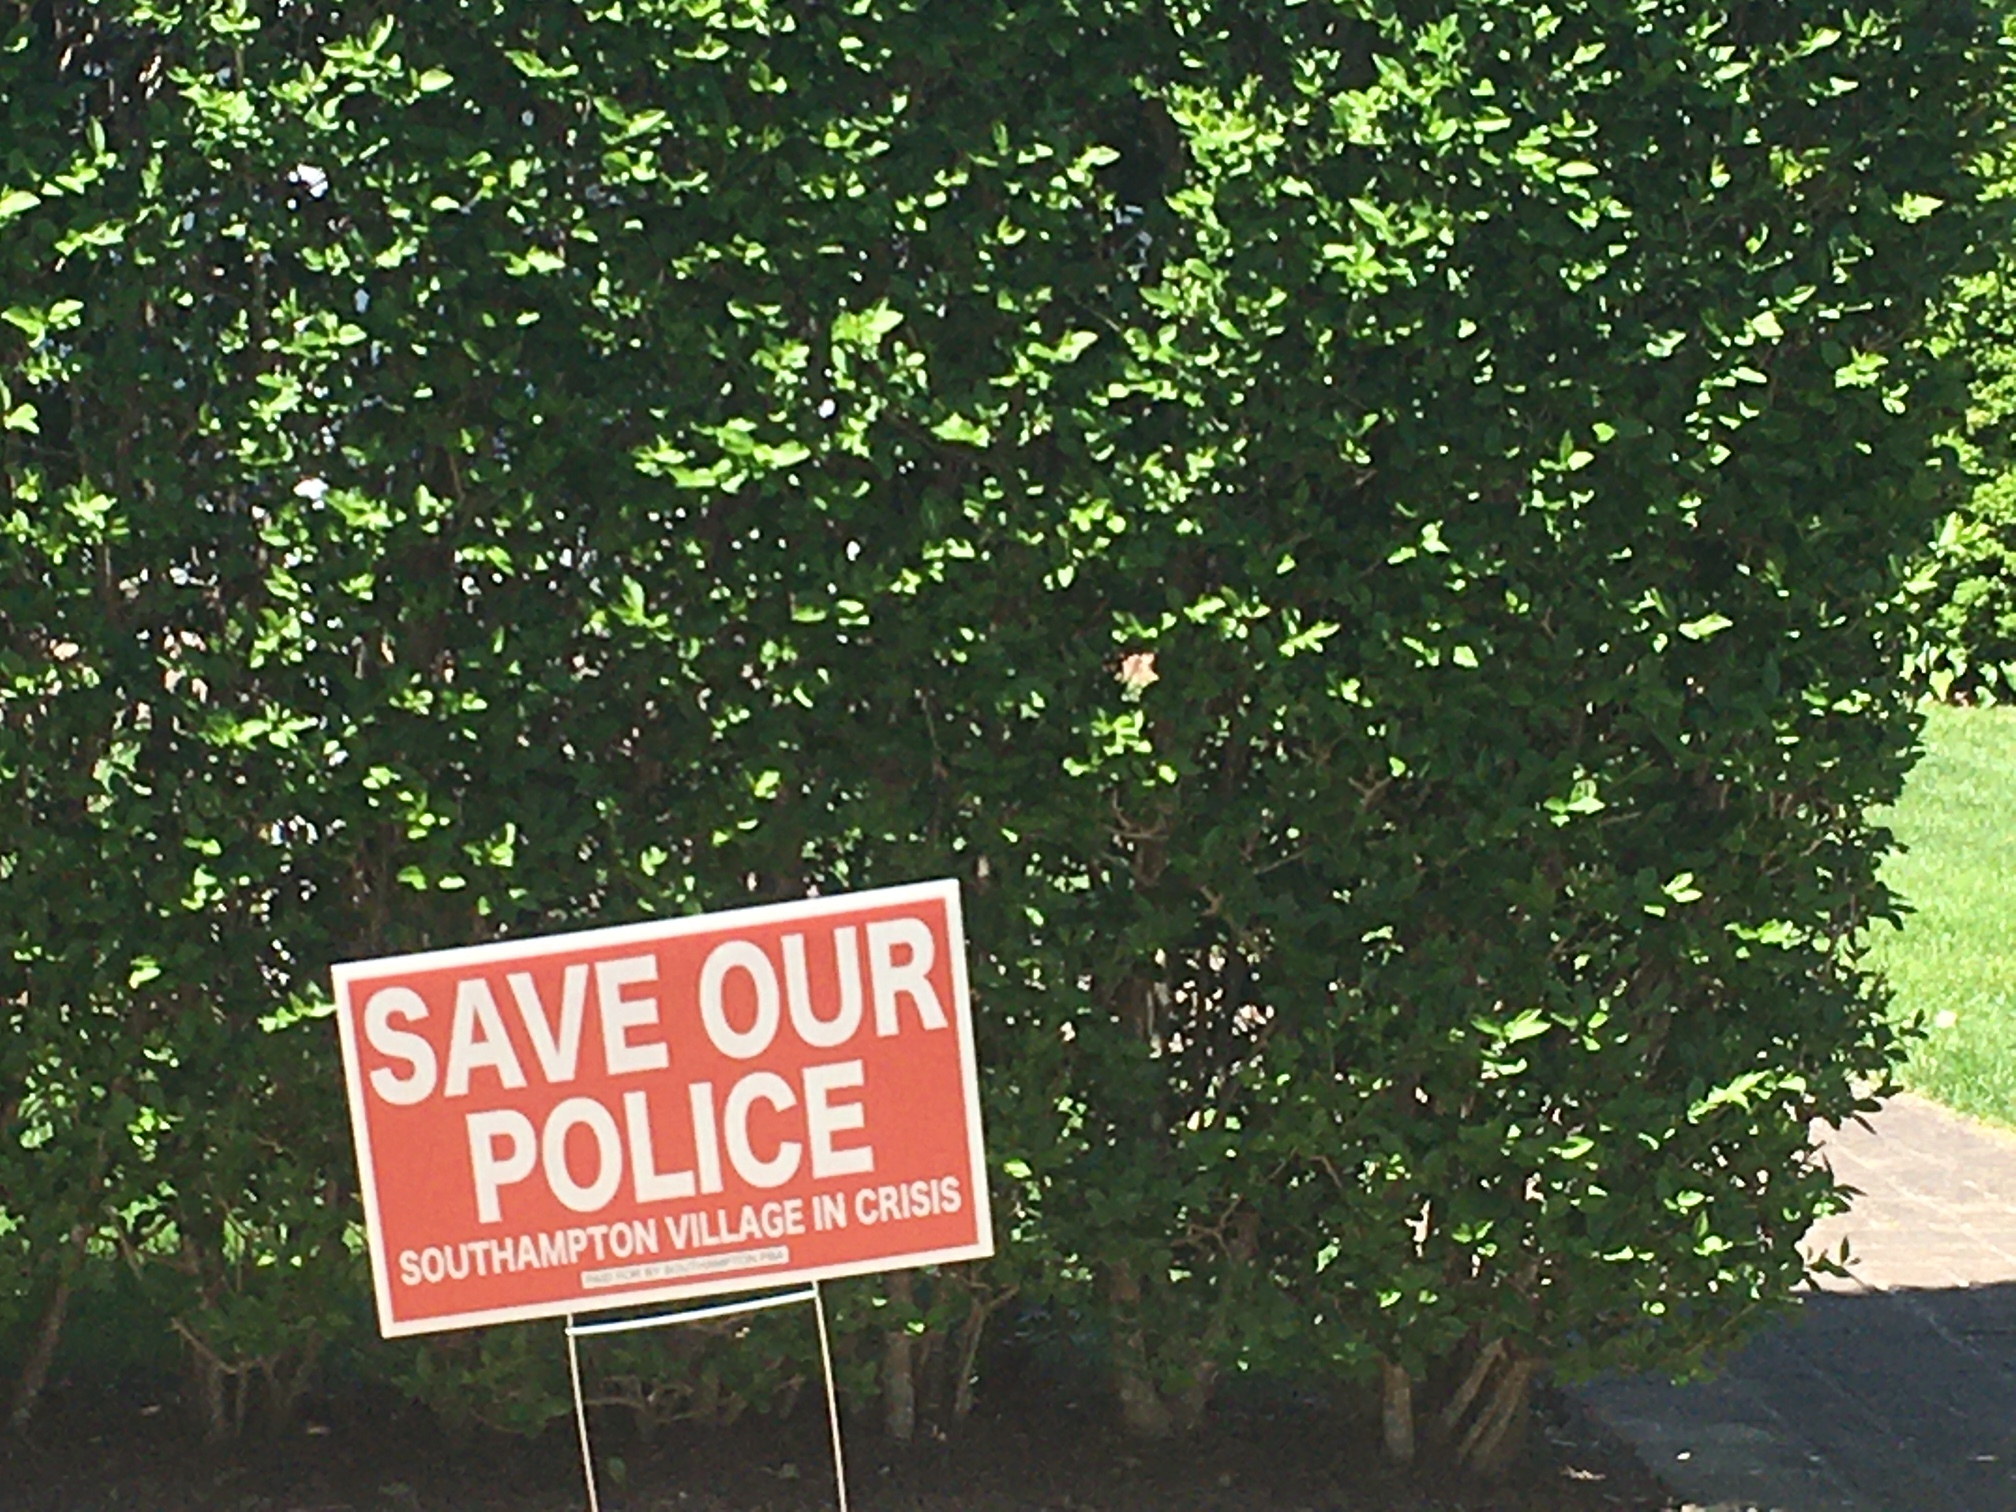 Signs in support of Southampton Village Police popped up as the operational report was underway.